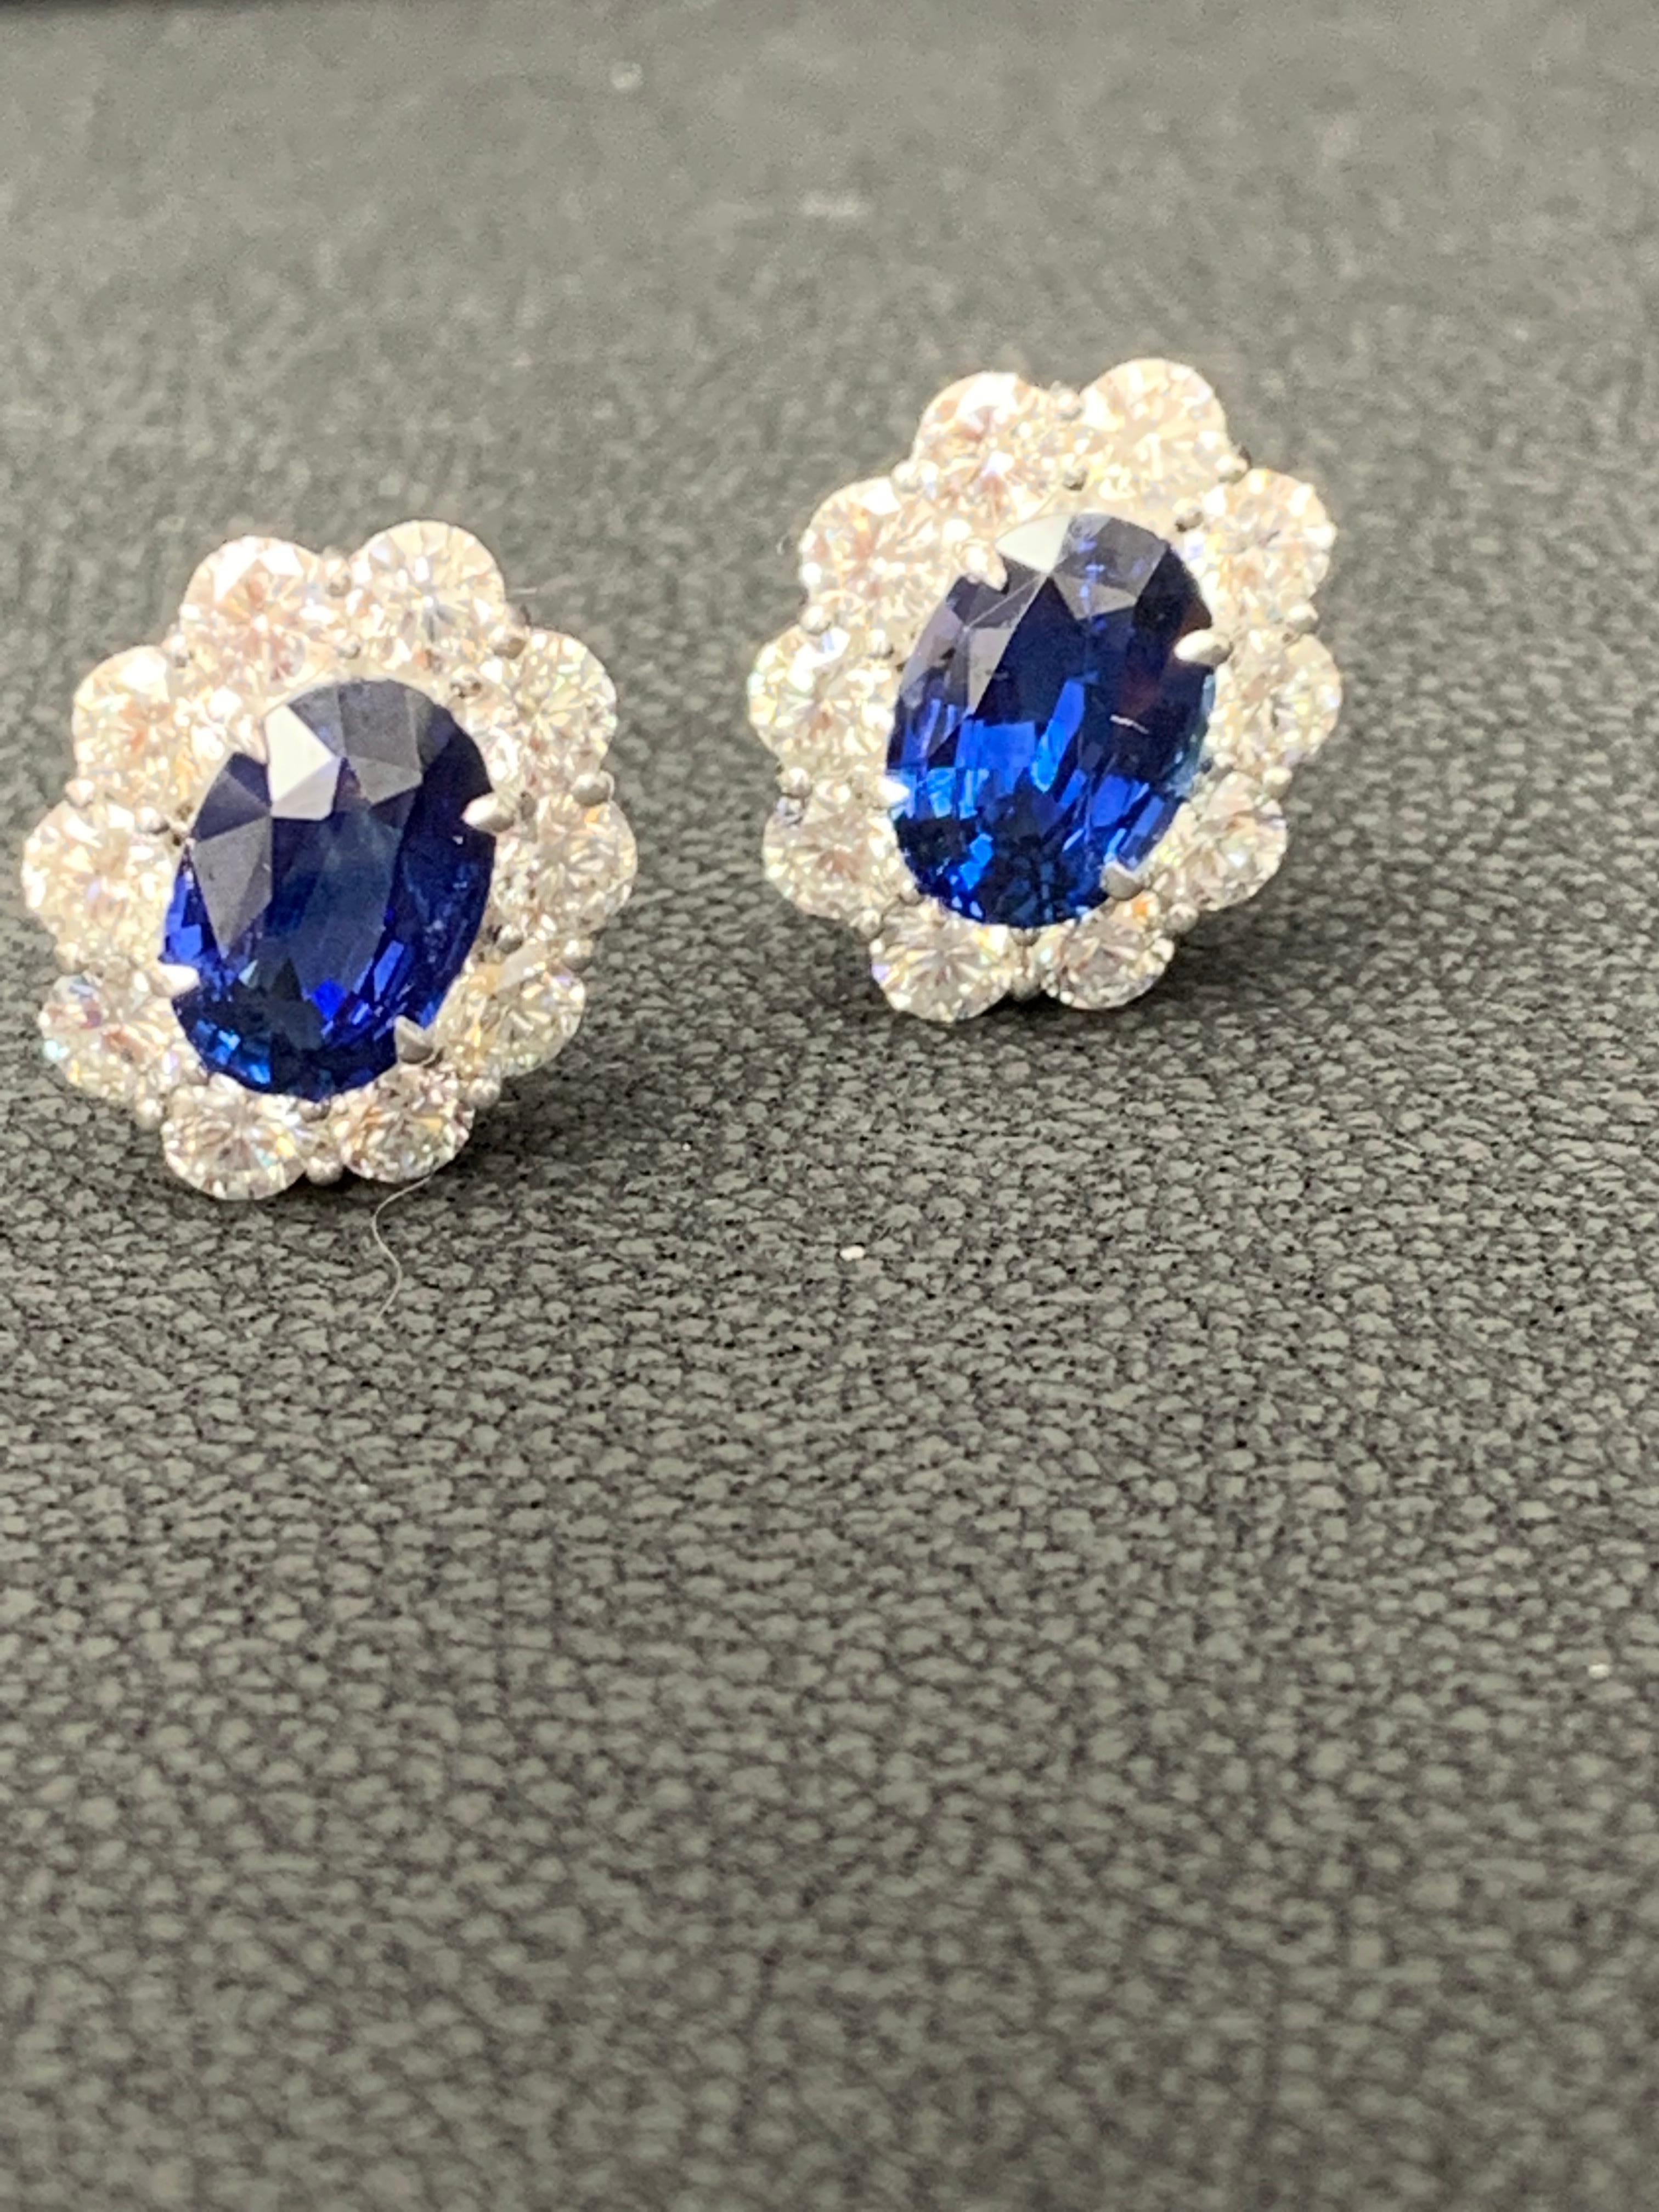 6.28 Carat Oval Cut Blue Sapphire and Diamond Halo Earrings in 18K White Gold For Sale 2